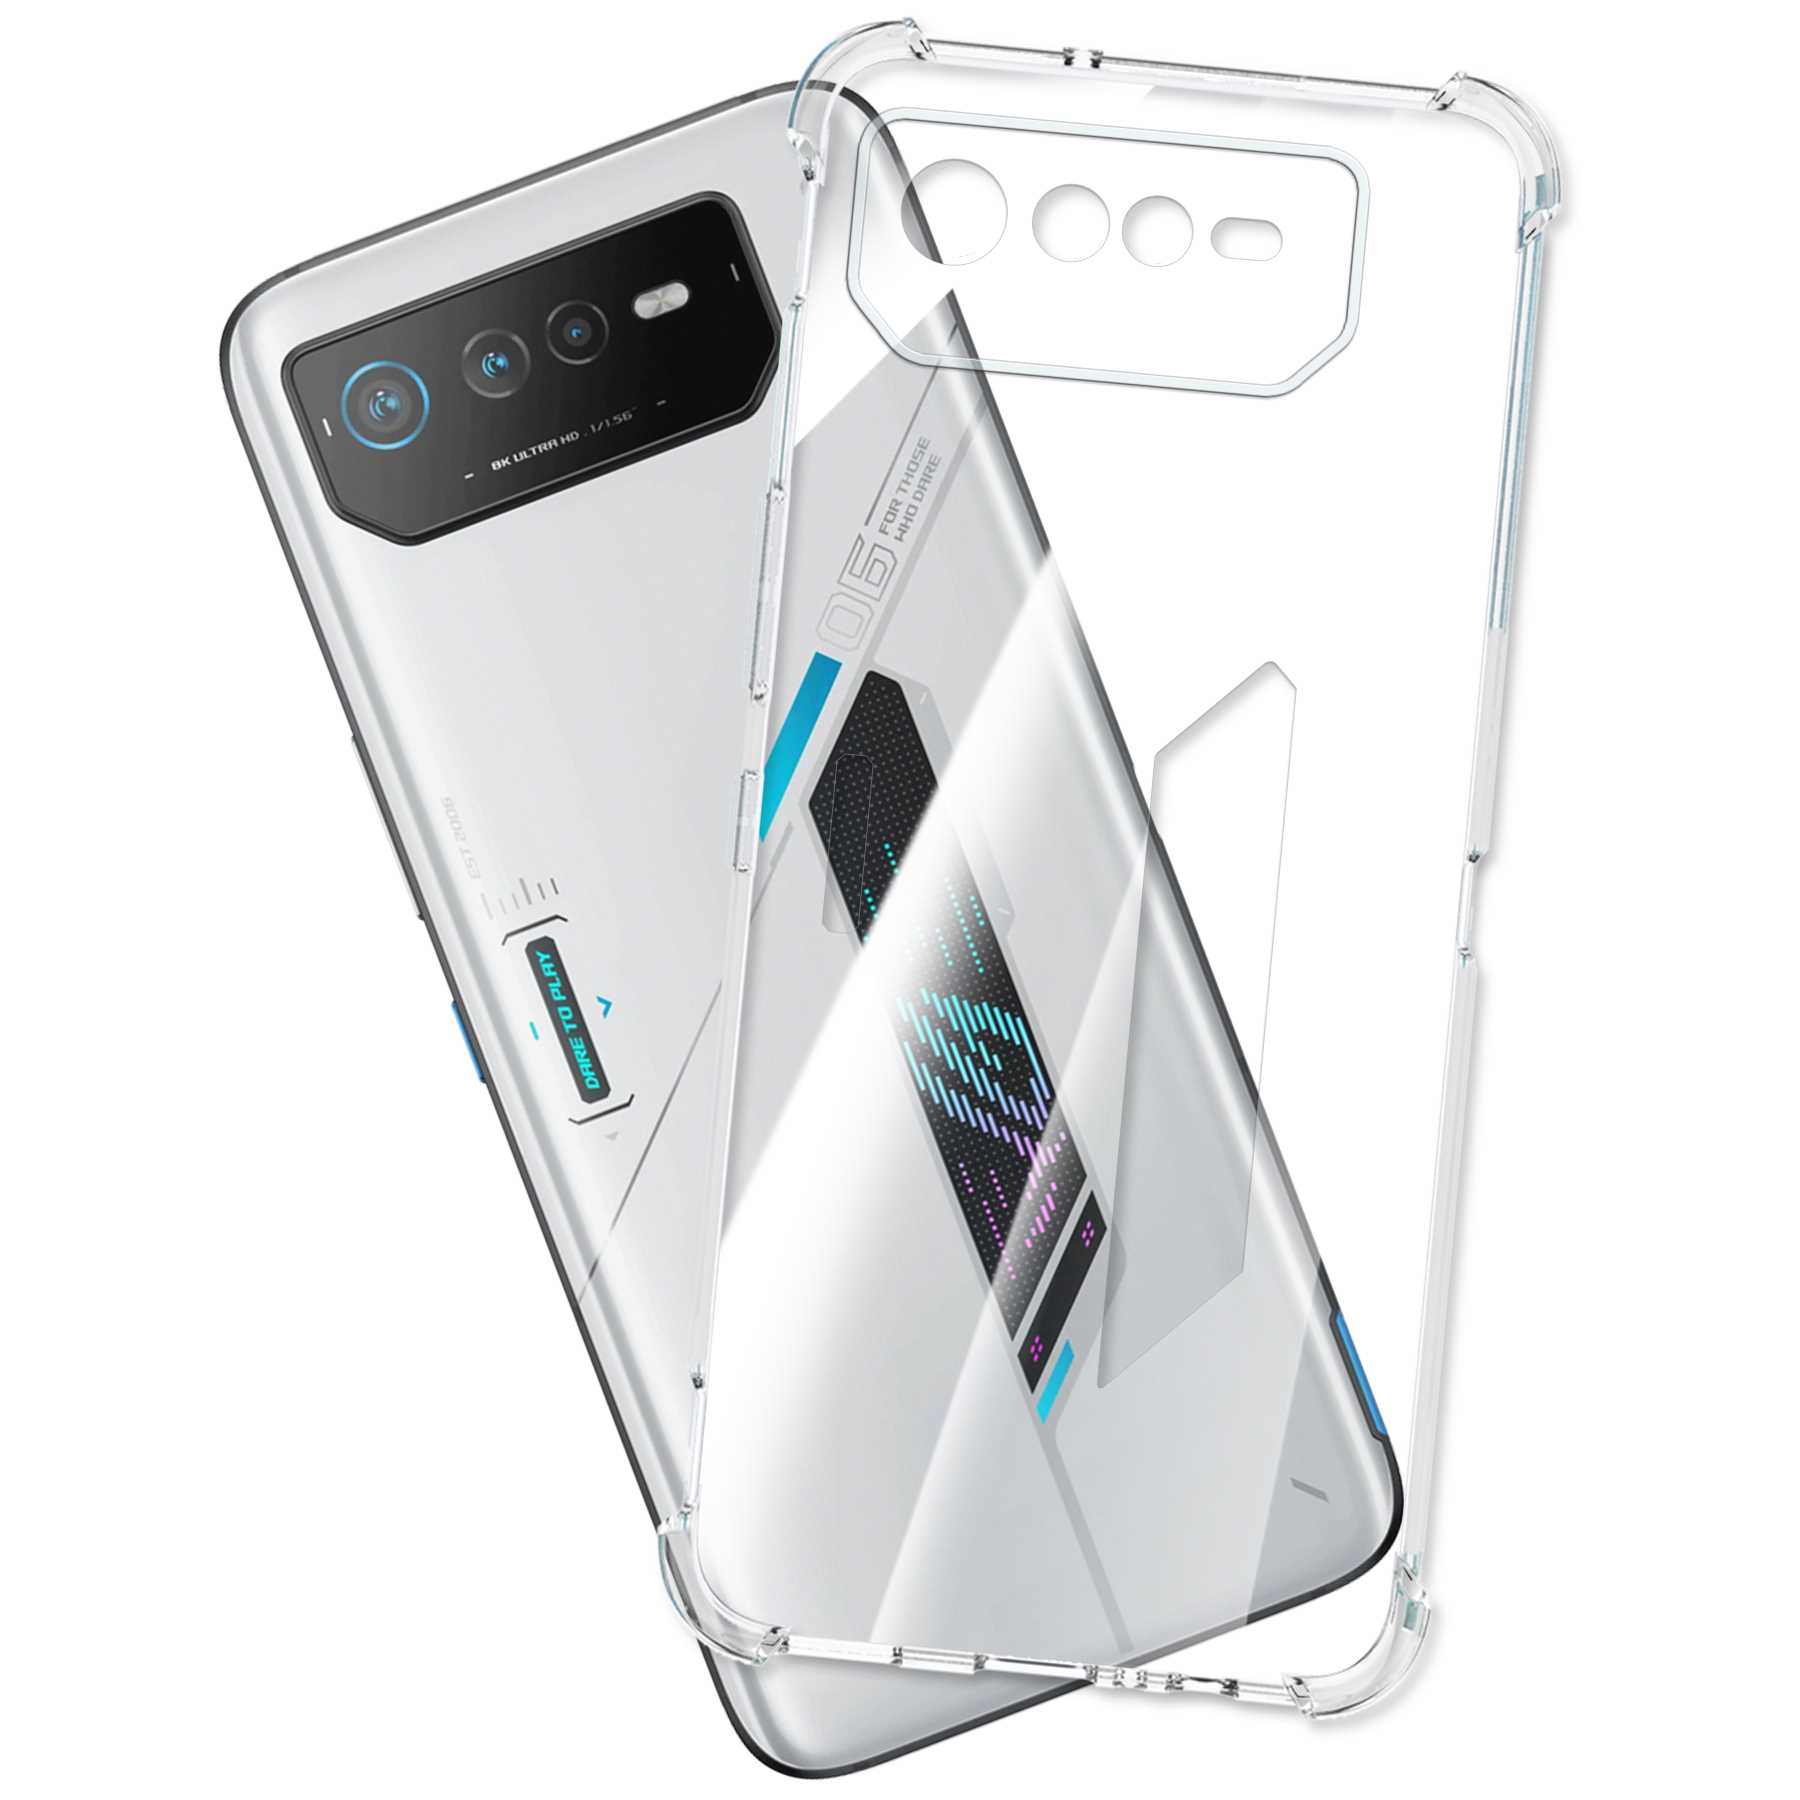 MTB MORE ENERGY Clear Armor Asus, 6D, Phone Transparent 6, Backcover, ROG Case